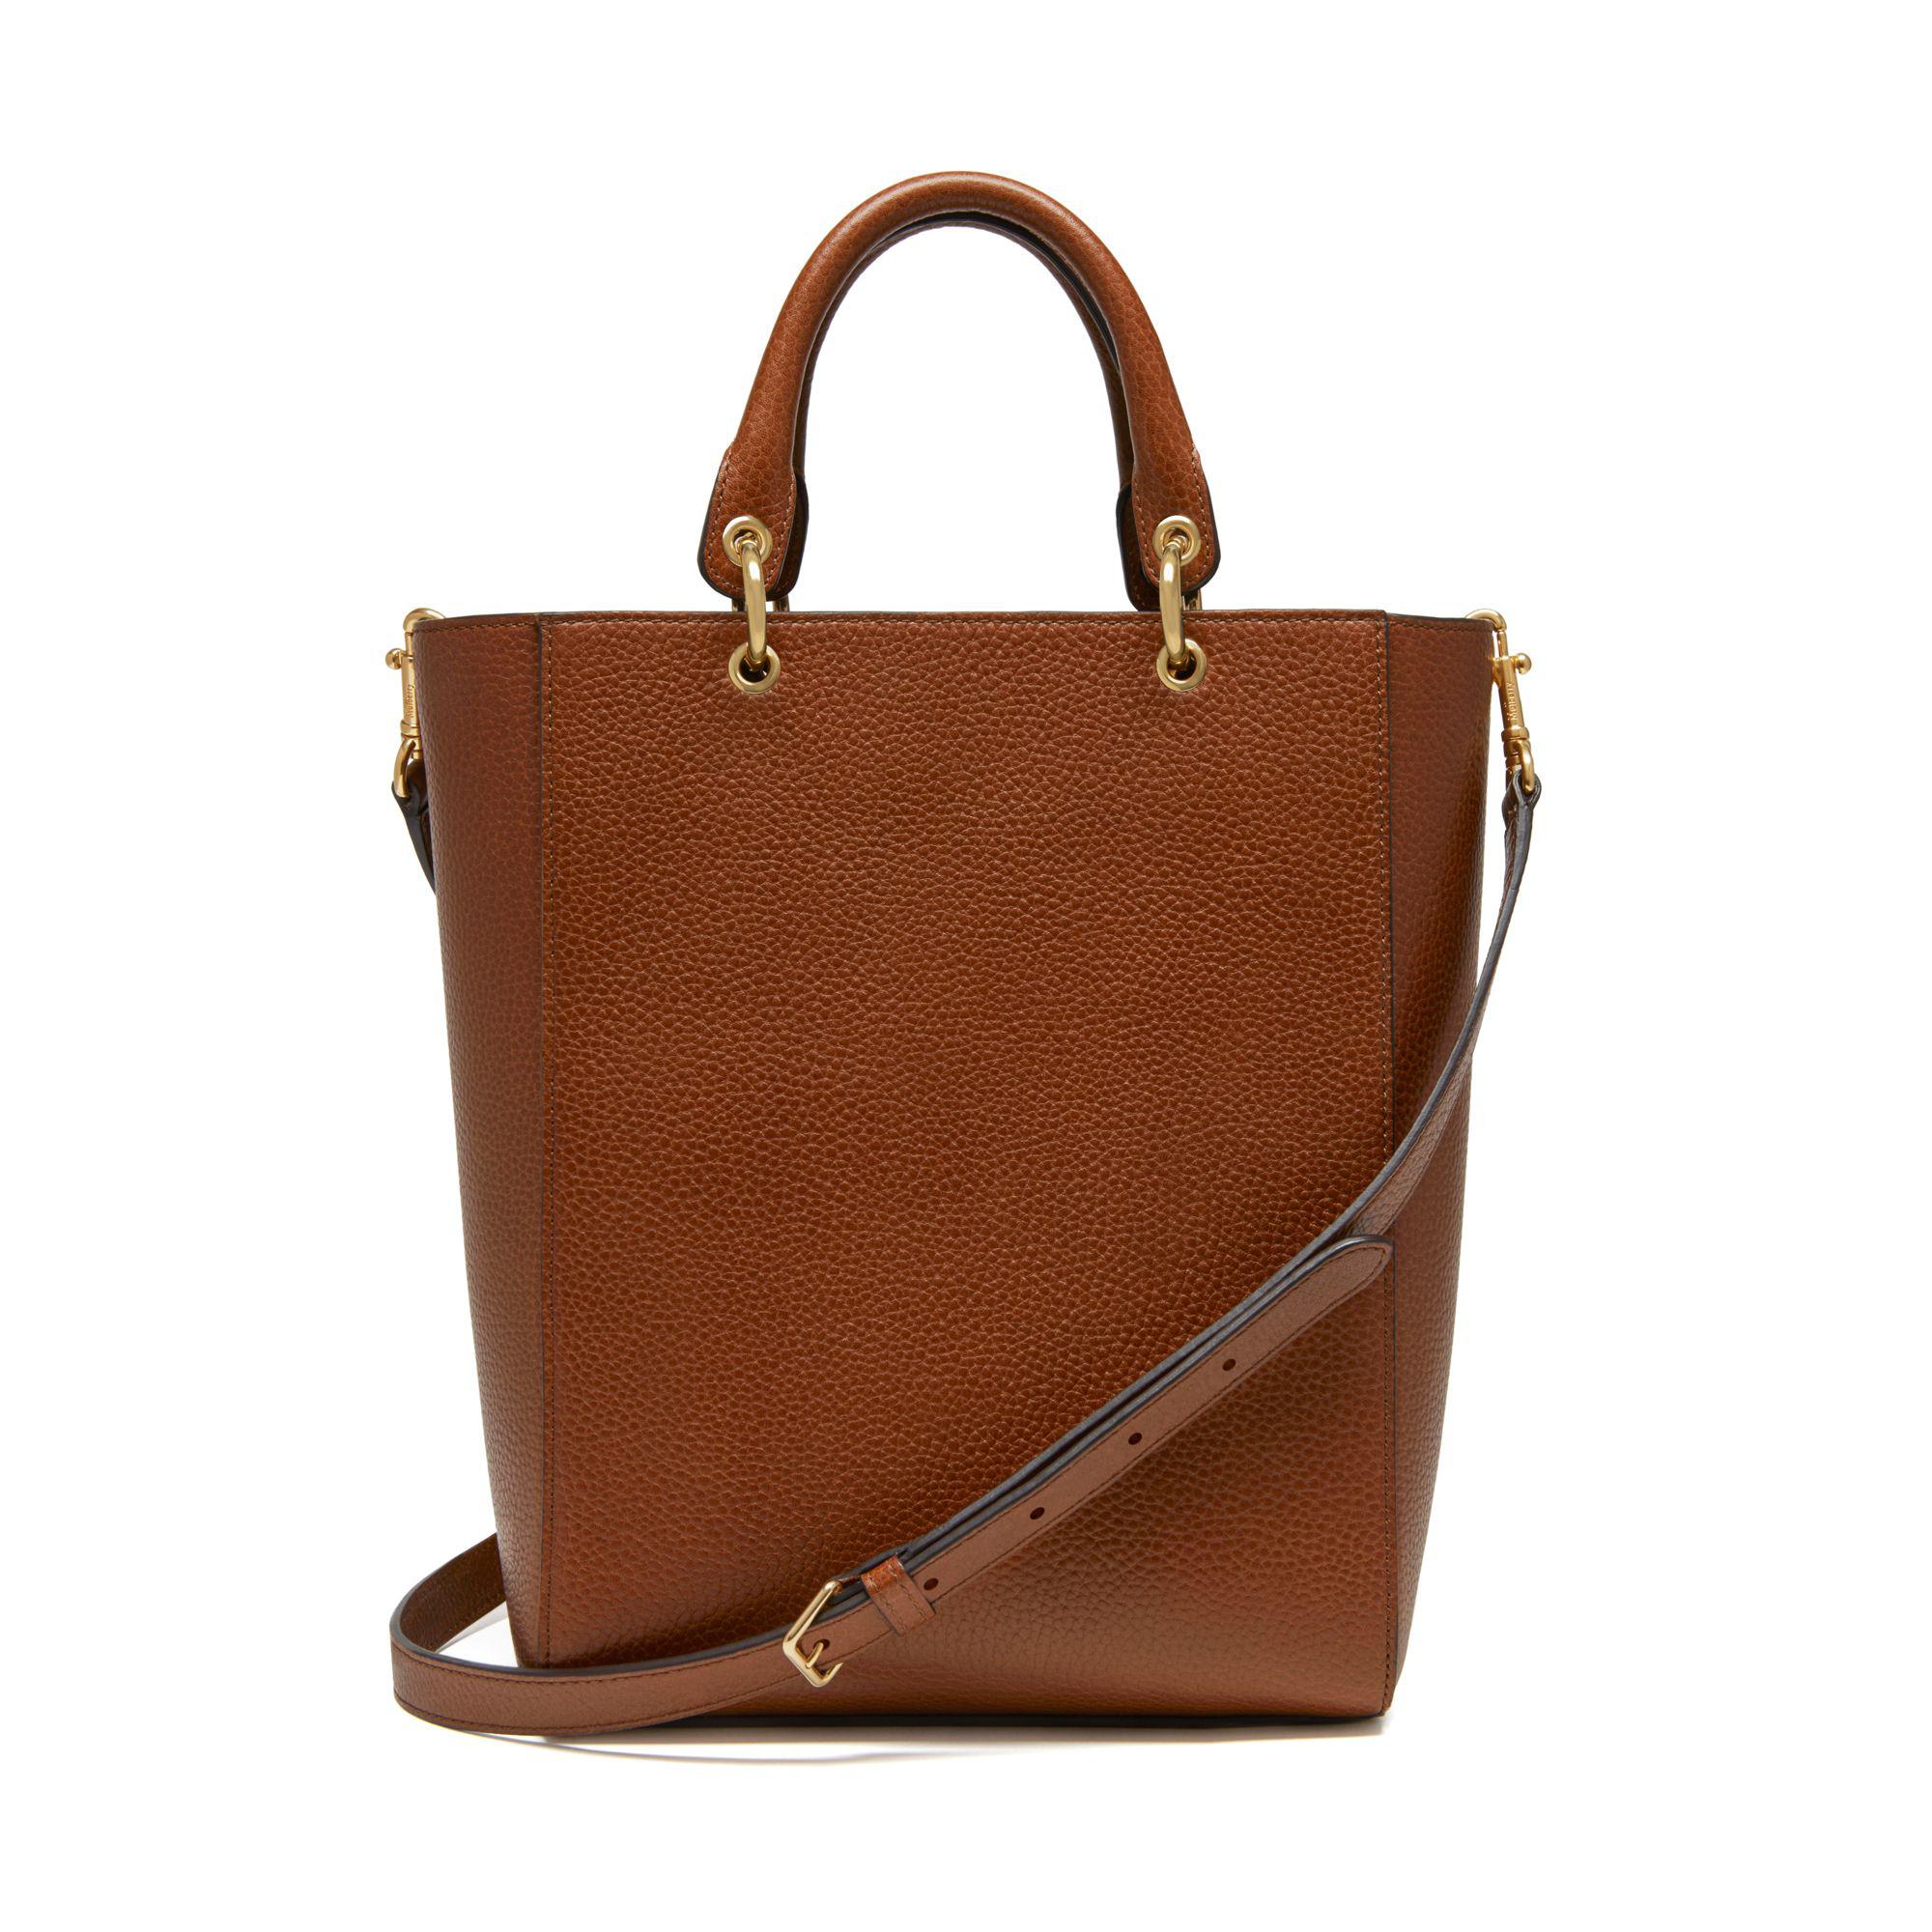 Mulberry Small Maple Leather Tote in Oak (Brown) - Lyst